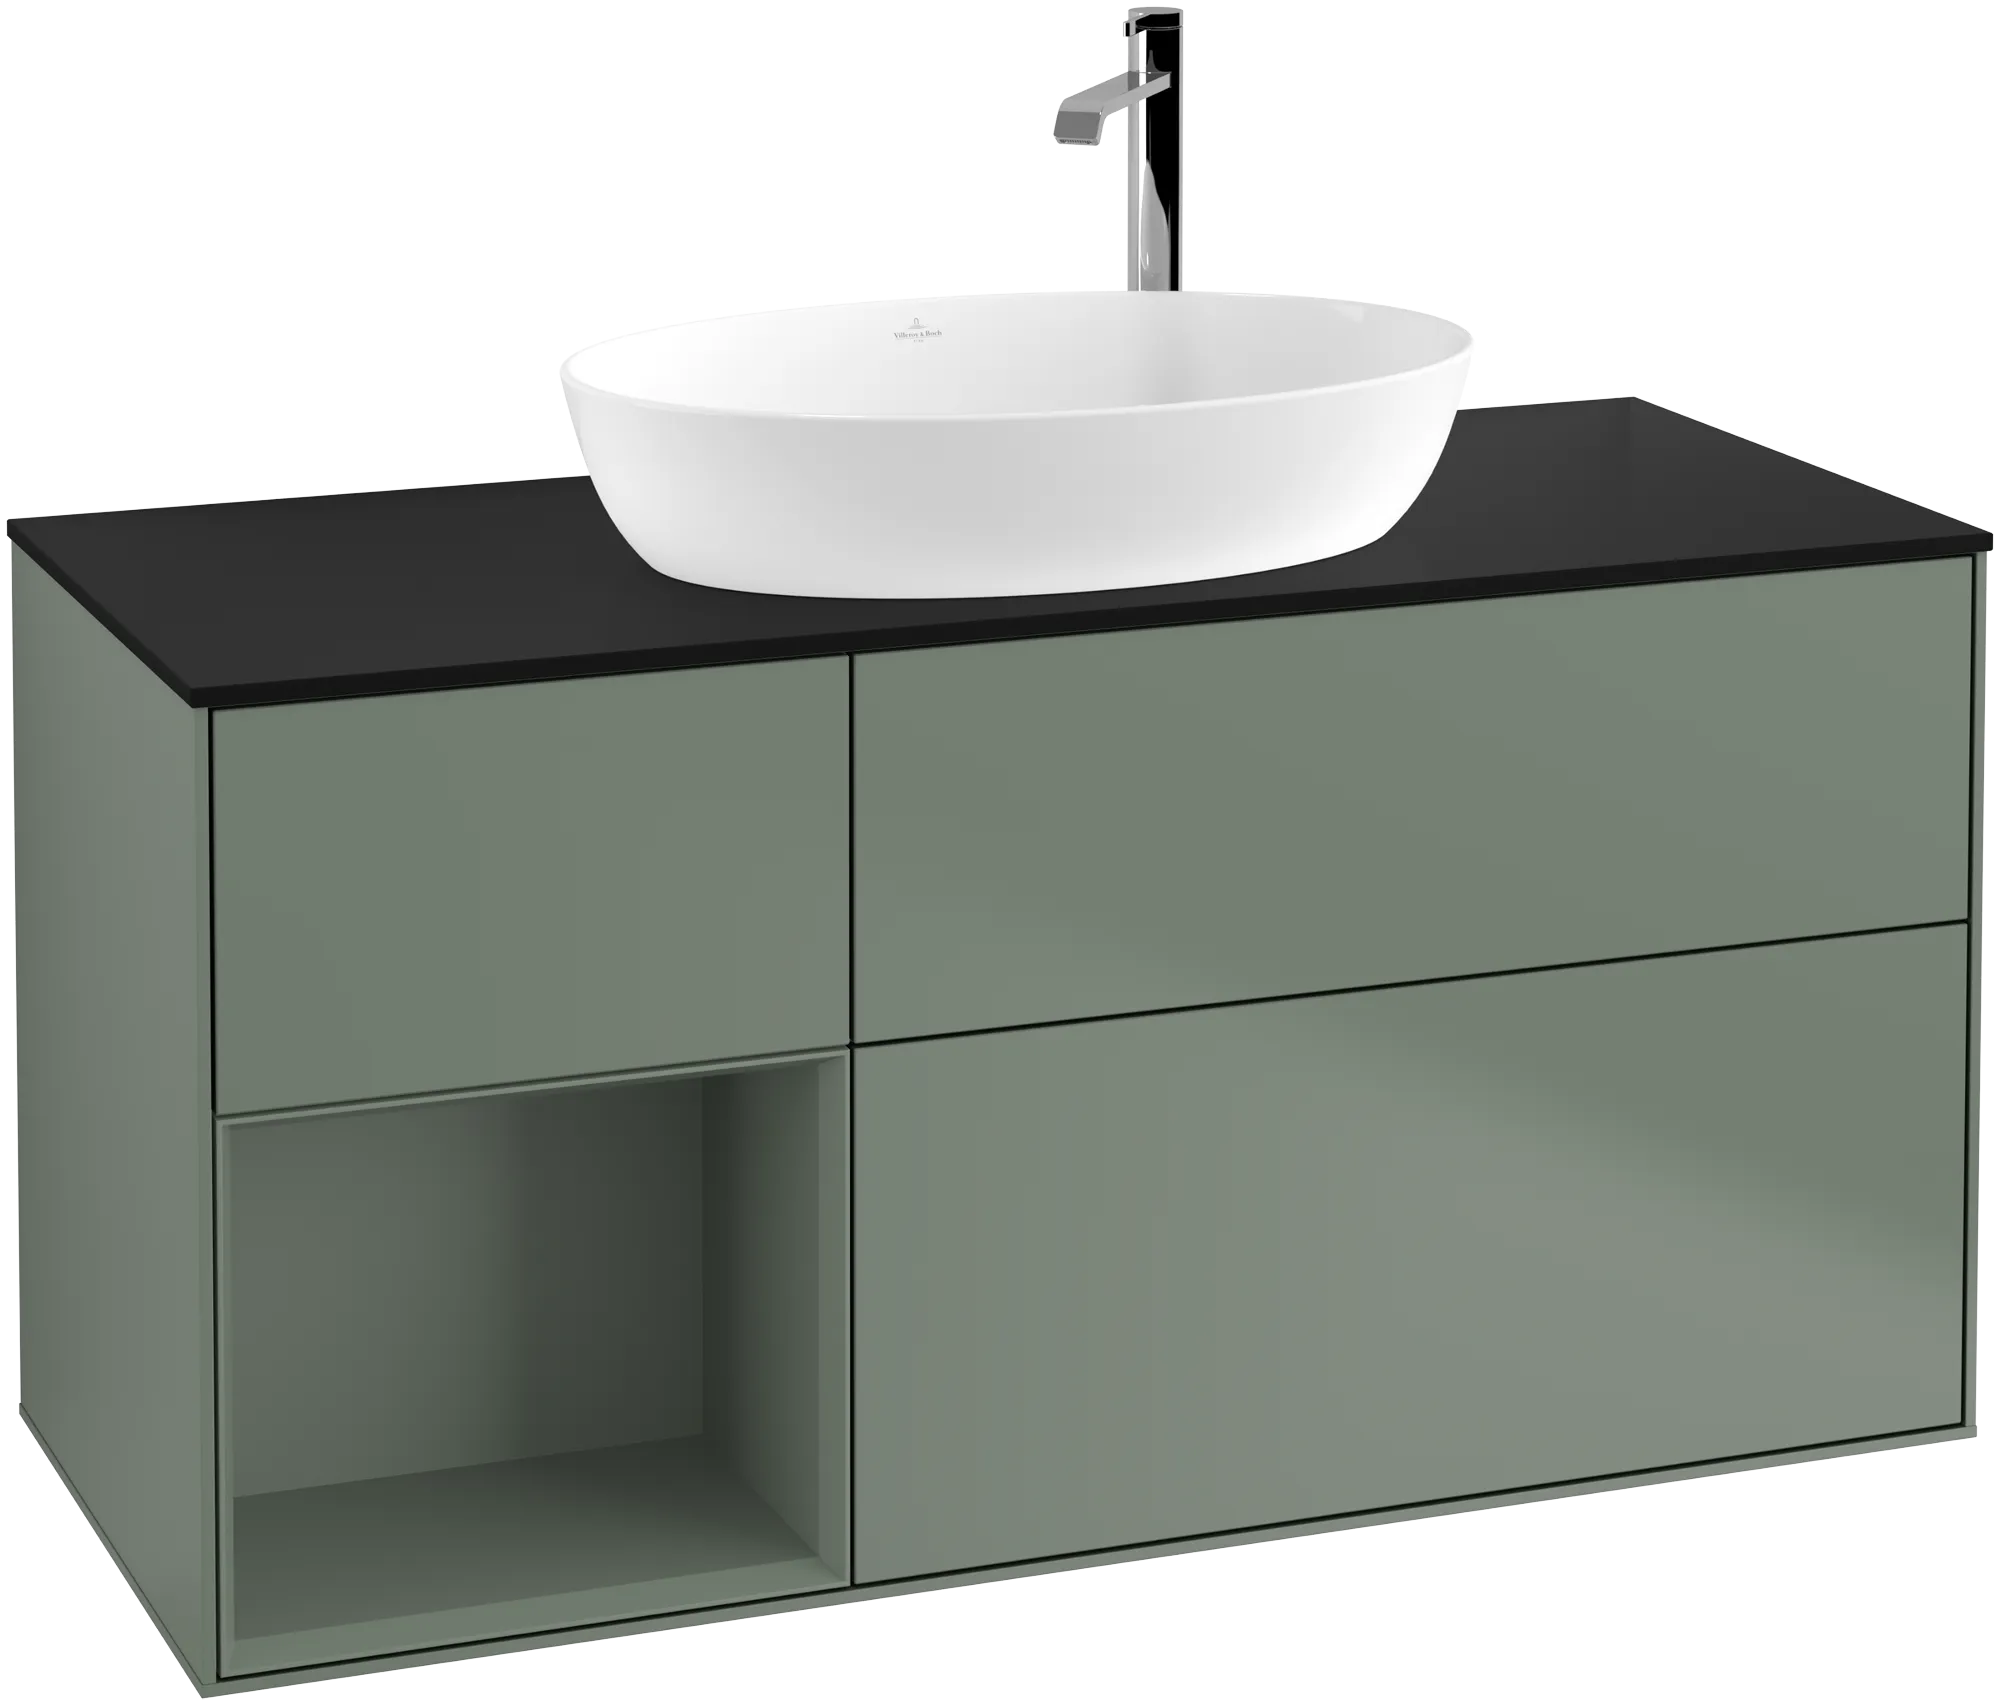 Obrázek VILLEROY BOCH Finion Vanity unit, with lighting, 3 pull-out compartments, 1200 x 603 x 501 mm, Olive Matt Lacquer / Olive Matt Lacquer / Glass Black Matt #G942GMGM